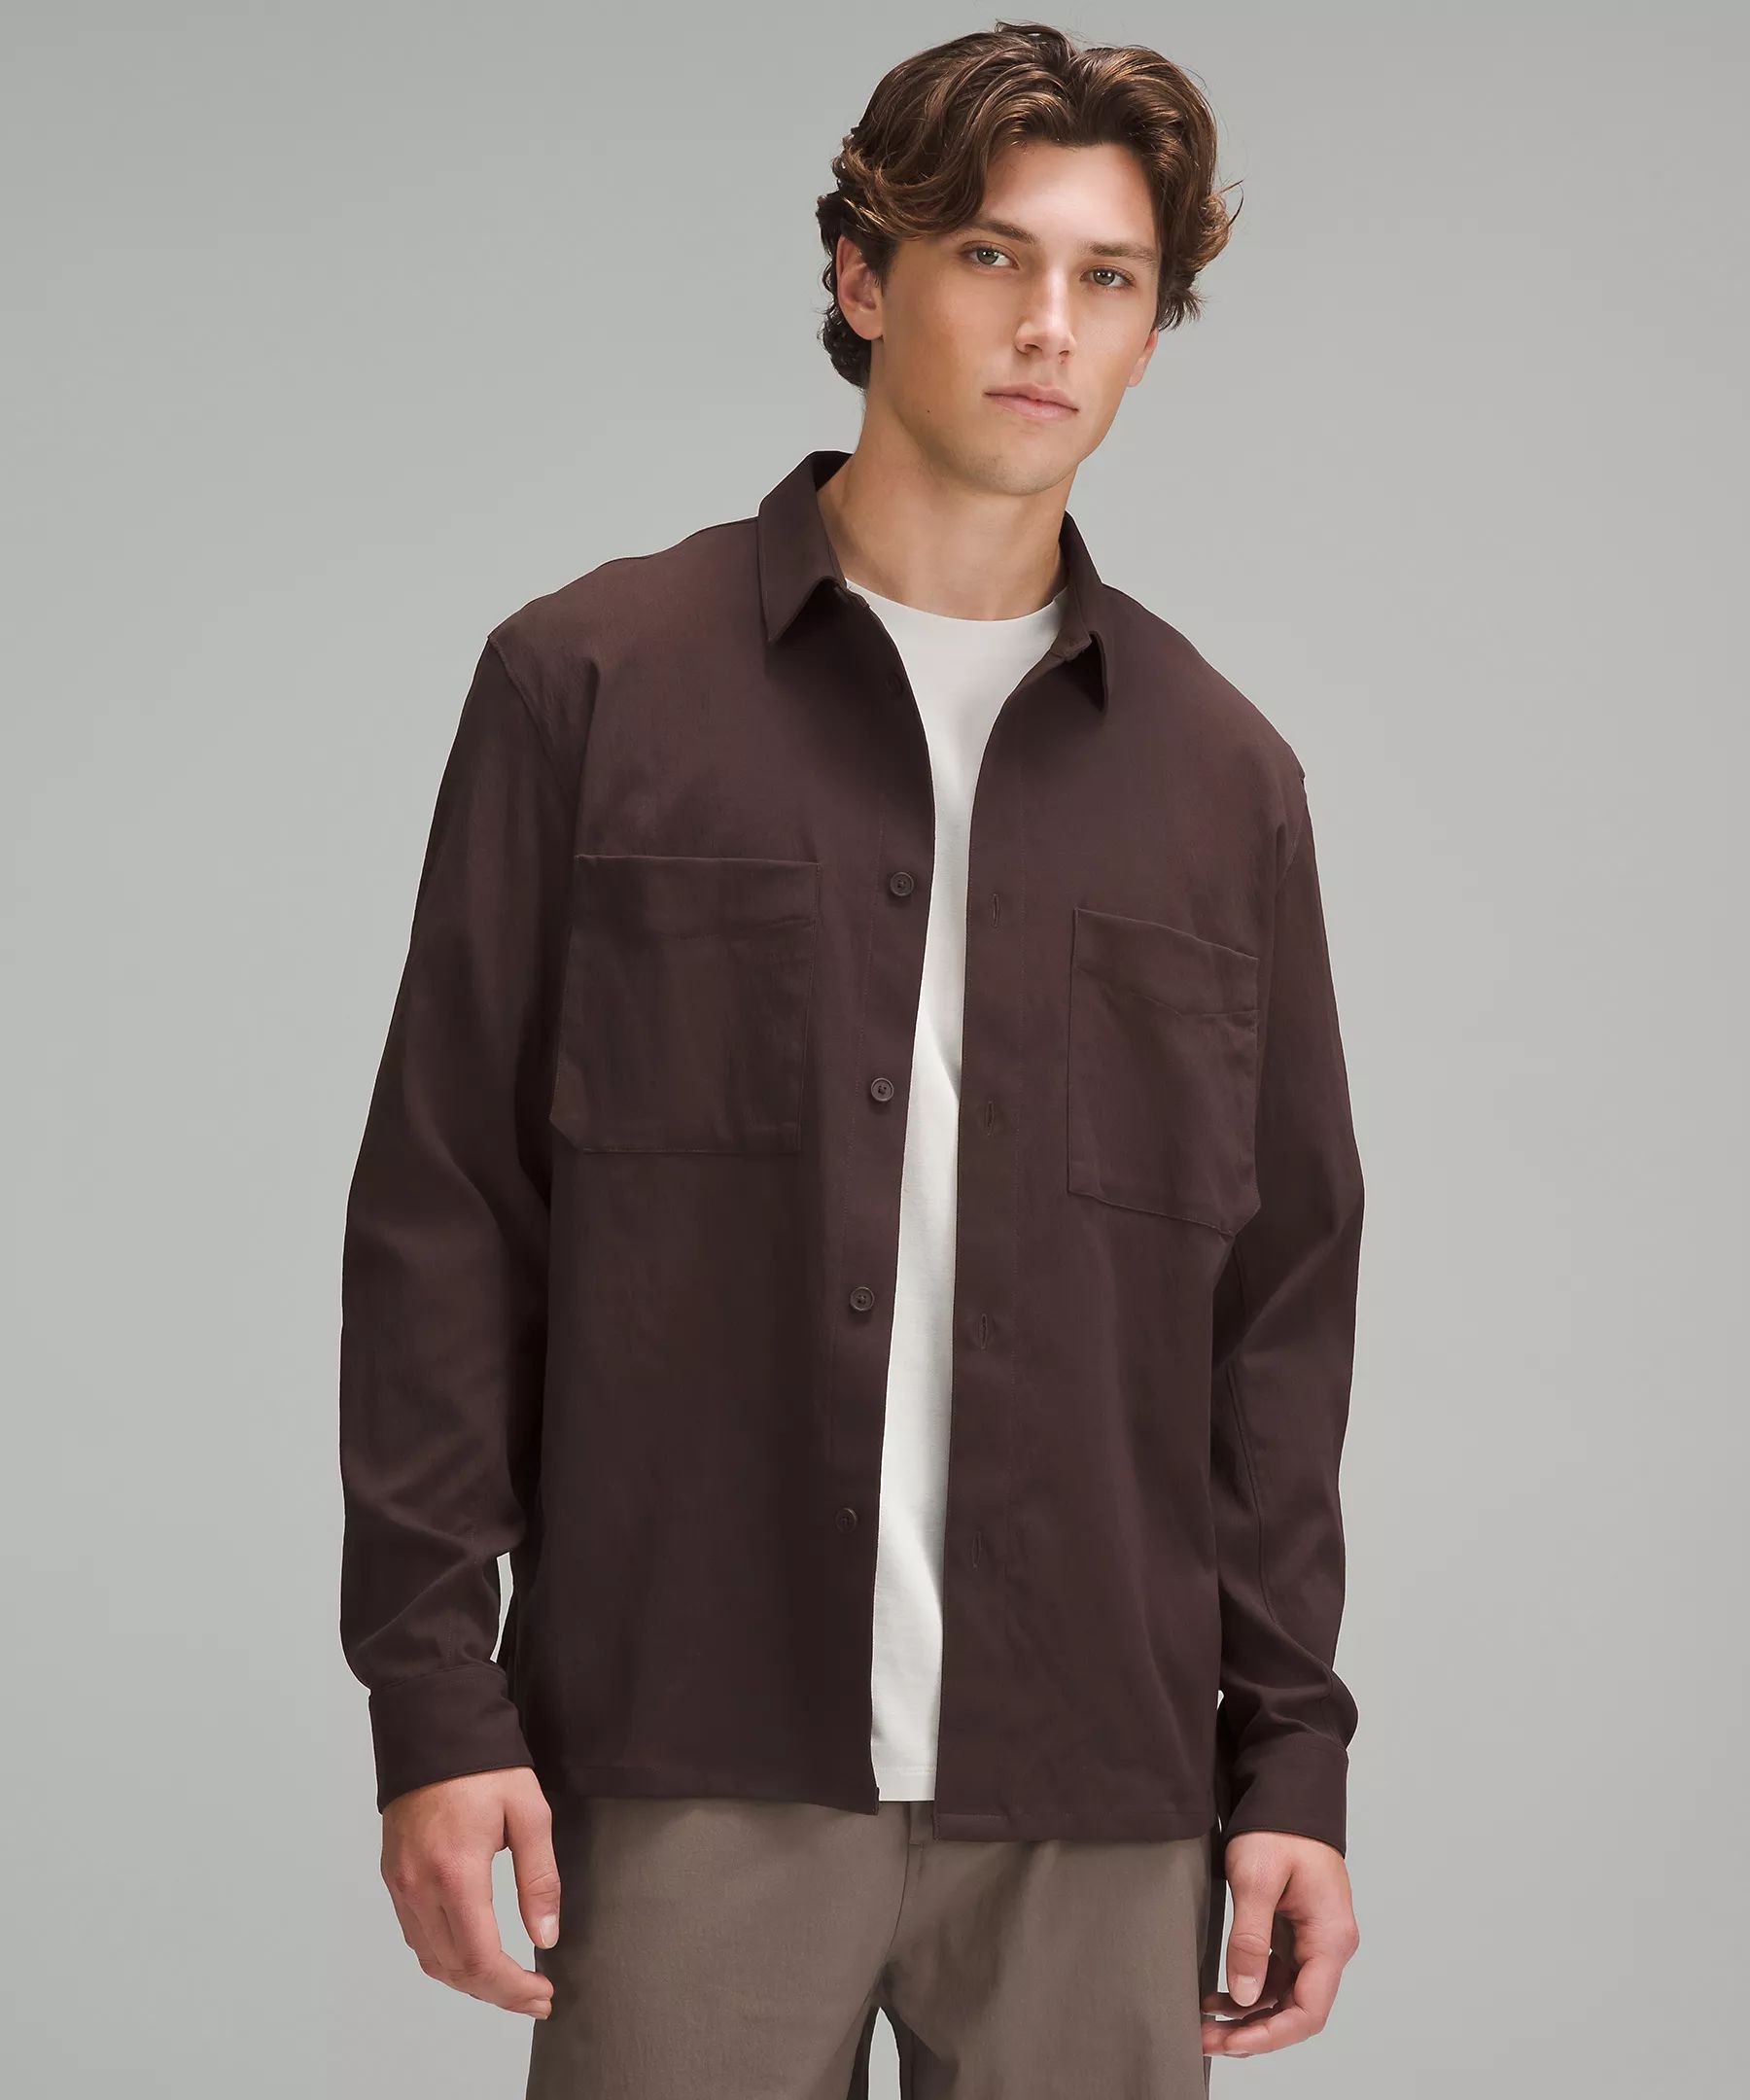 Relaxed-Fit Long-Sleeve Button-Up Shirt | Men's Long Sleeve Shirts | lululemon | Lululemon (US)